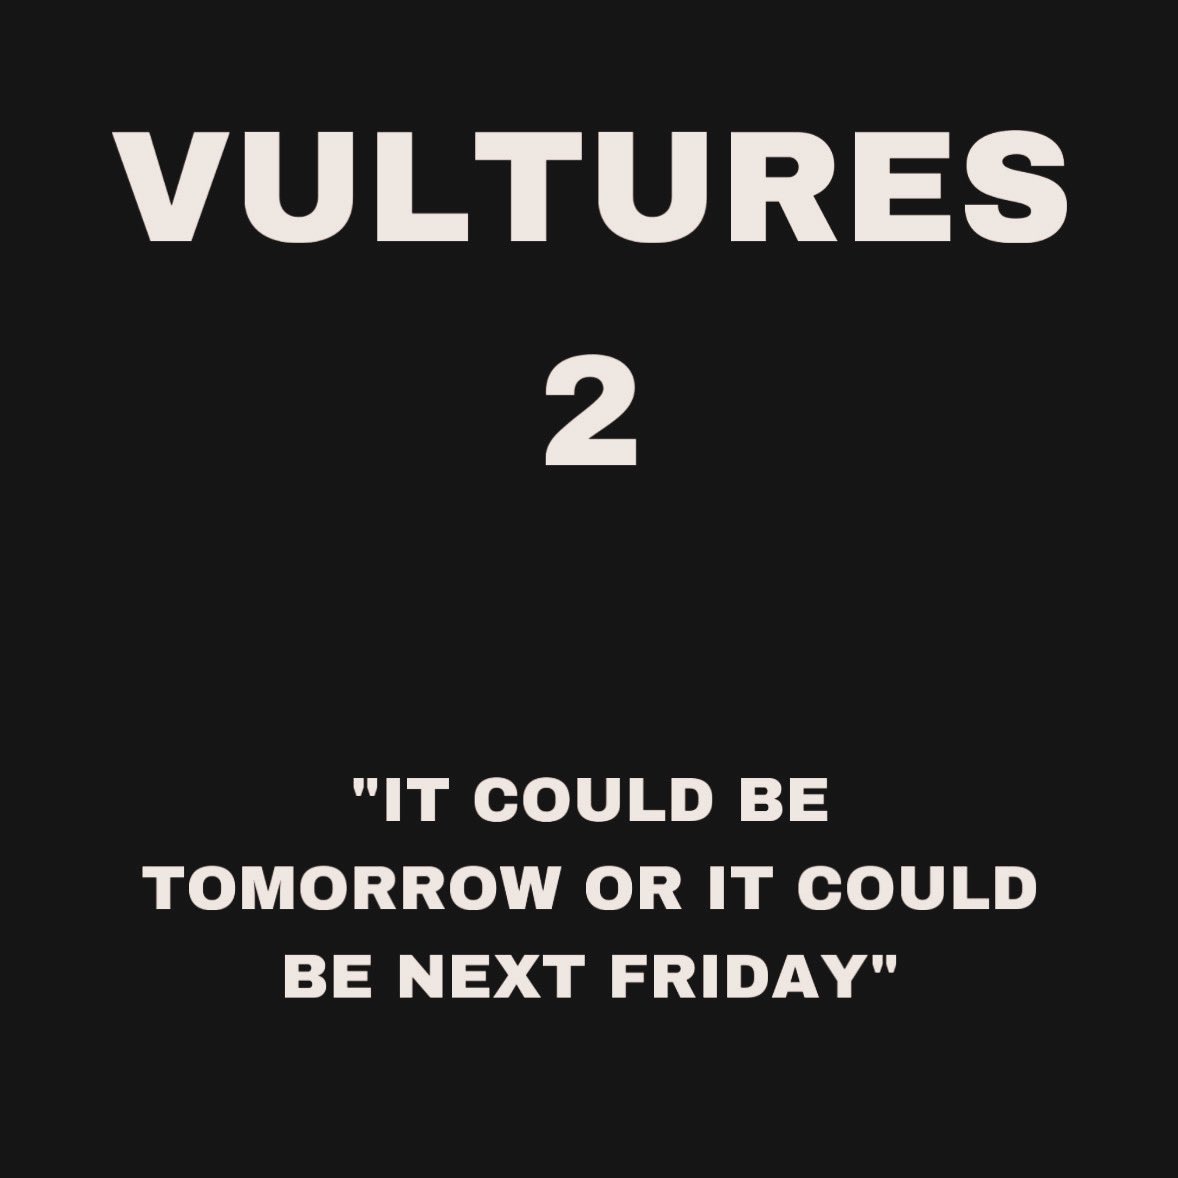 VULTURES 2

'IT COULD BE TOMORROW 
OR IT  
COULD BE NEXT FRIDAY'